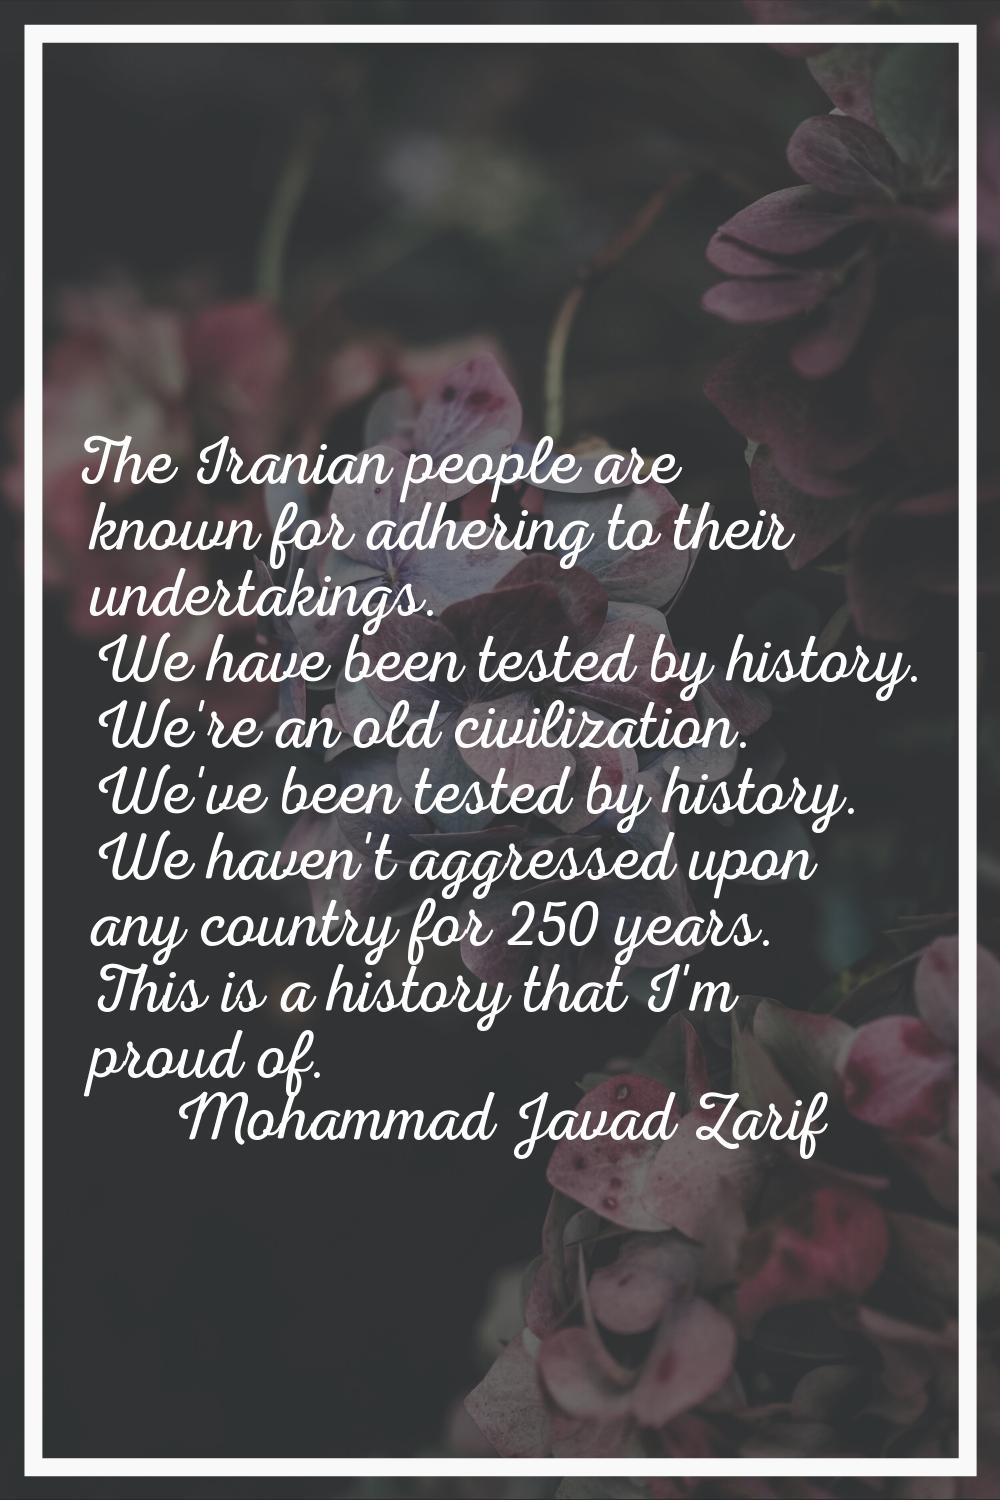 The Iranian people are known for adhering to their undertakings. We have been tested by history. We